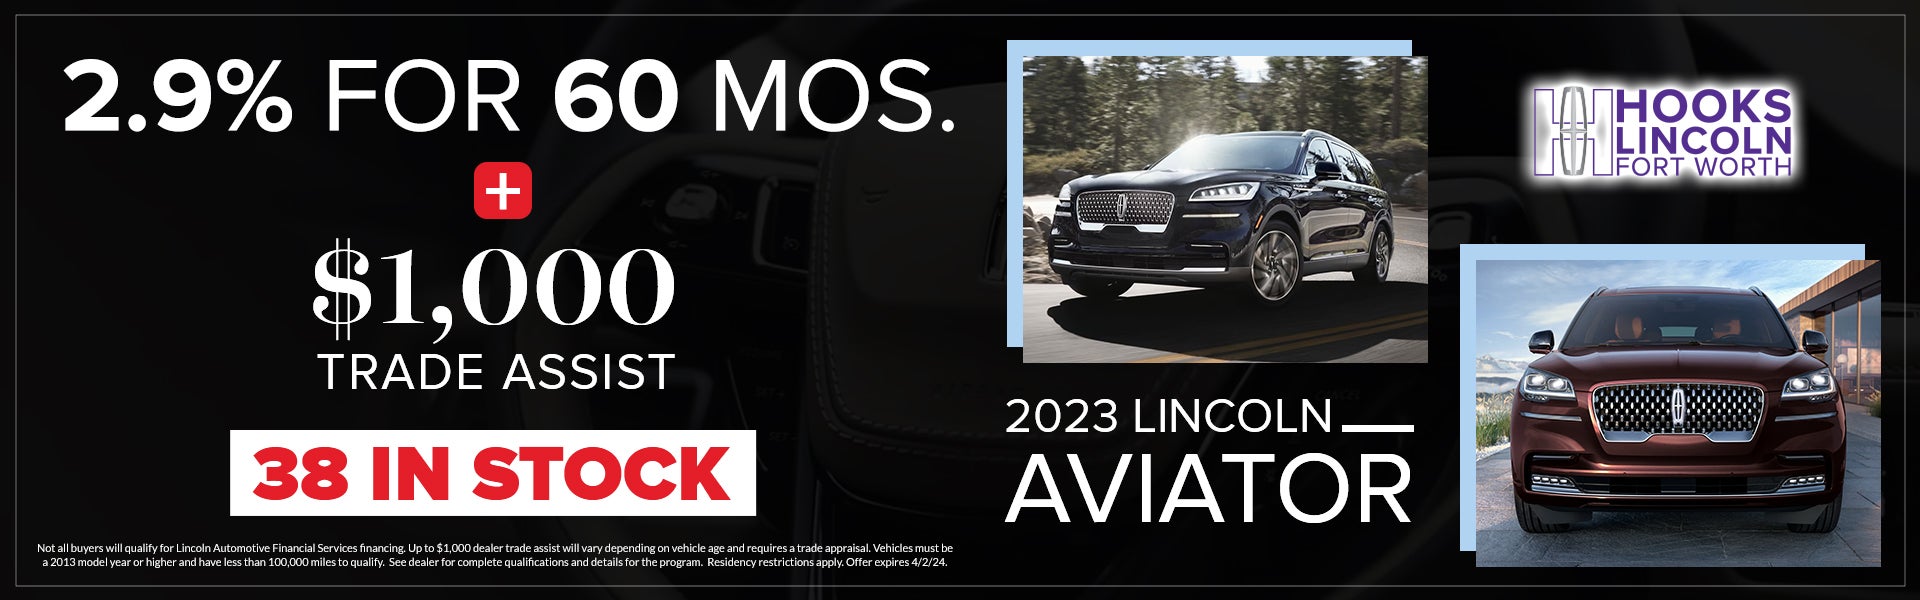 Trade Assist Available On 2023 Lincoln Aviator